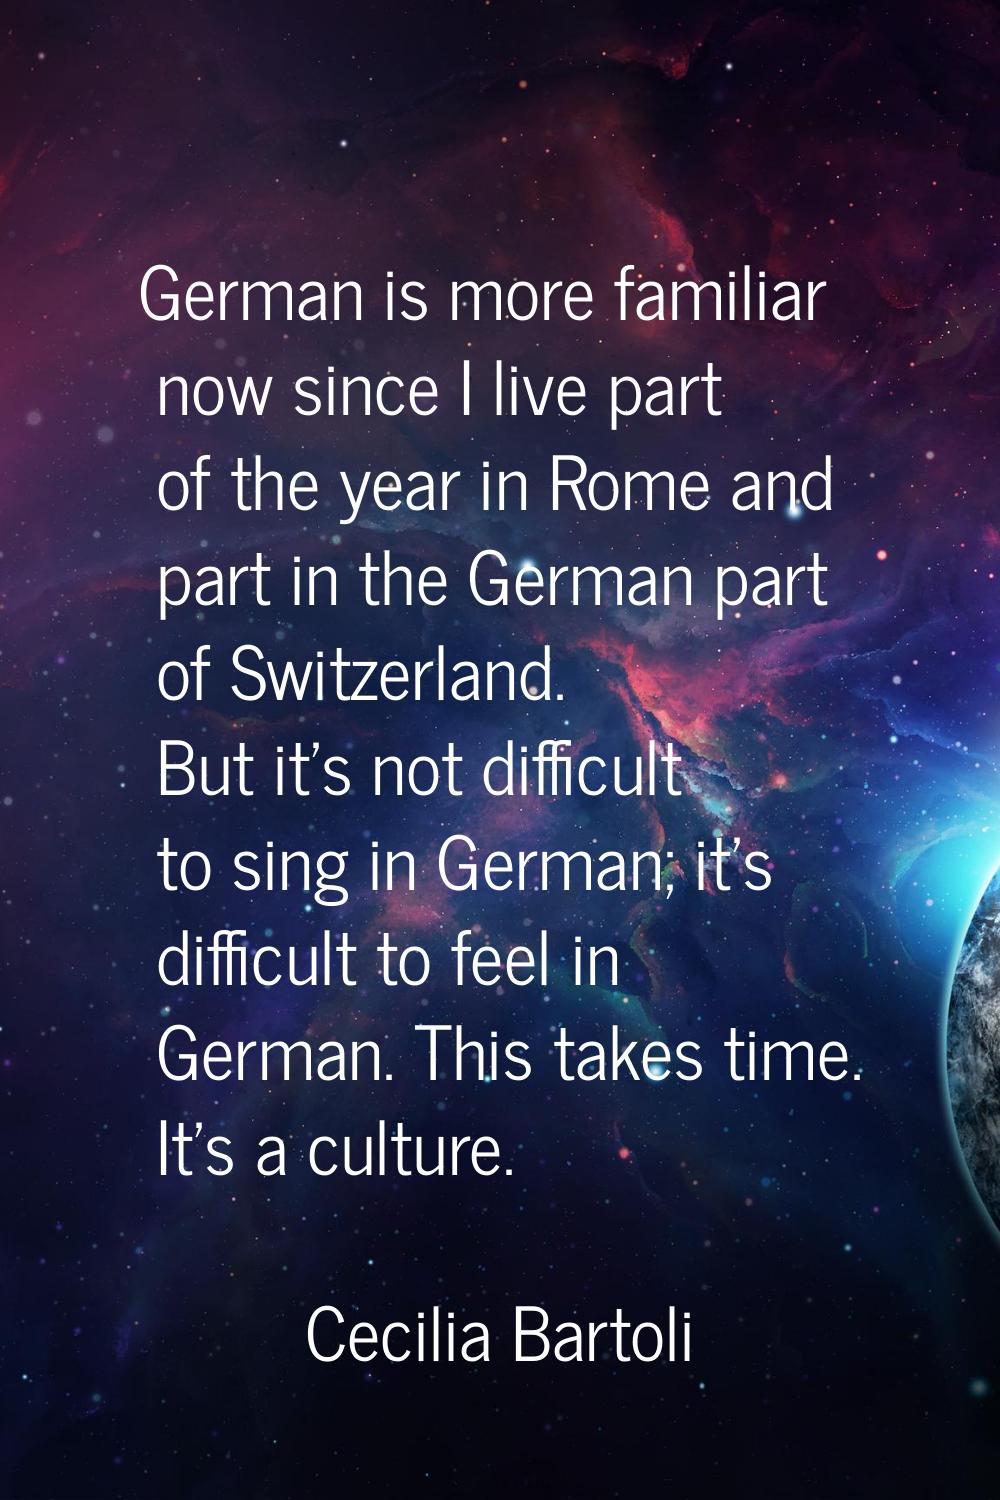 German is more familiar now since I live part of the year in Rome and part in the German part of Sw